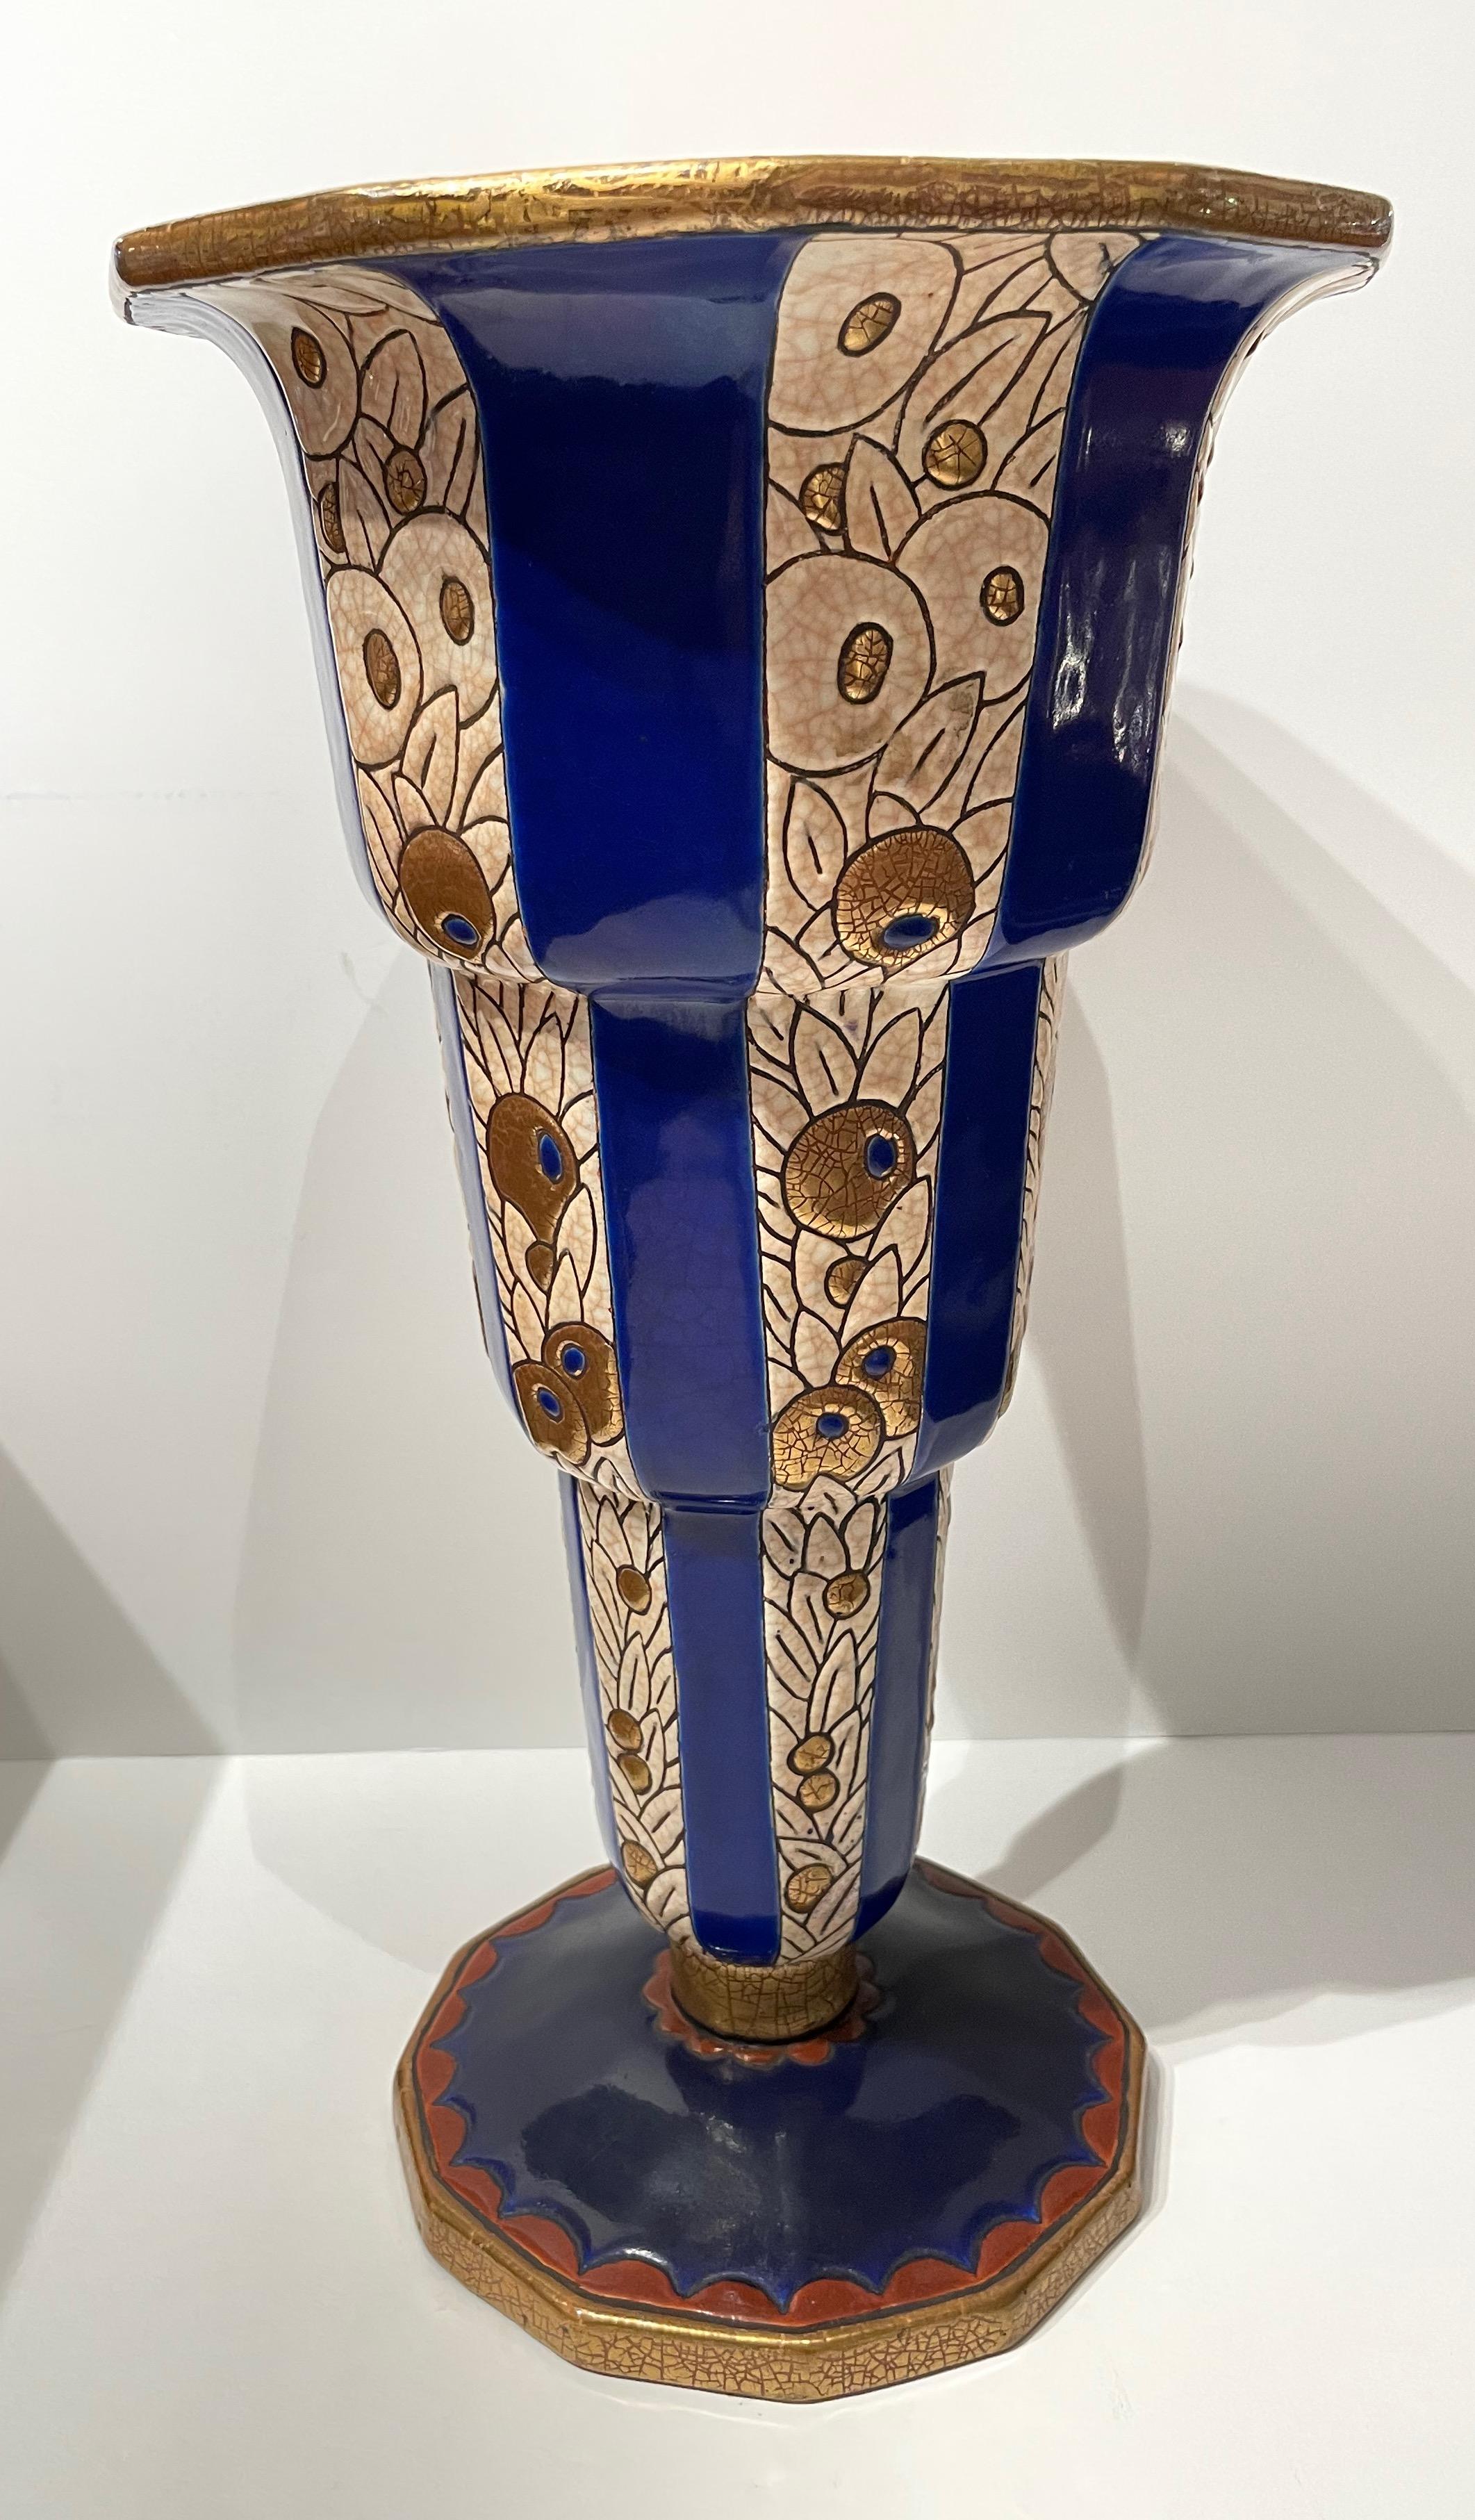 Longwy Art Deco French Cloisonné ceramic vase. Stunning extra large size, bright color with faceted base. Stepped design treatment of blue and gold with repeated flower pattern design intersected in blue triangular lines. This design intersects